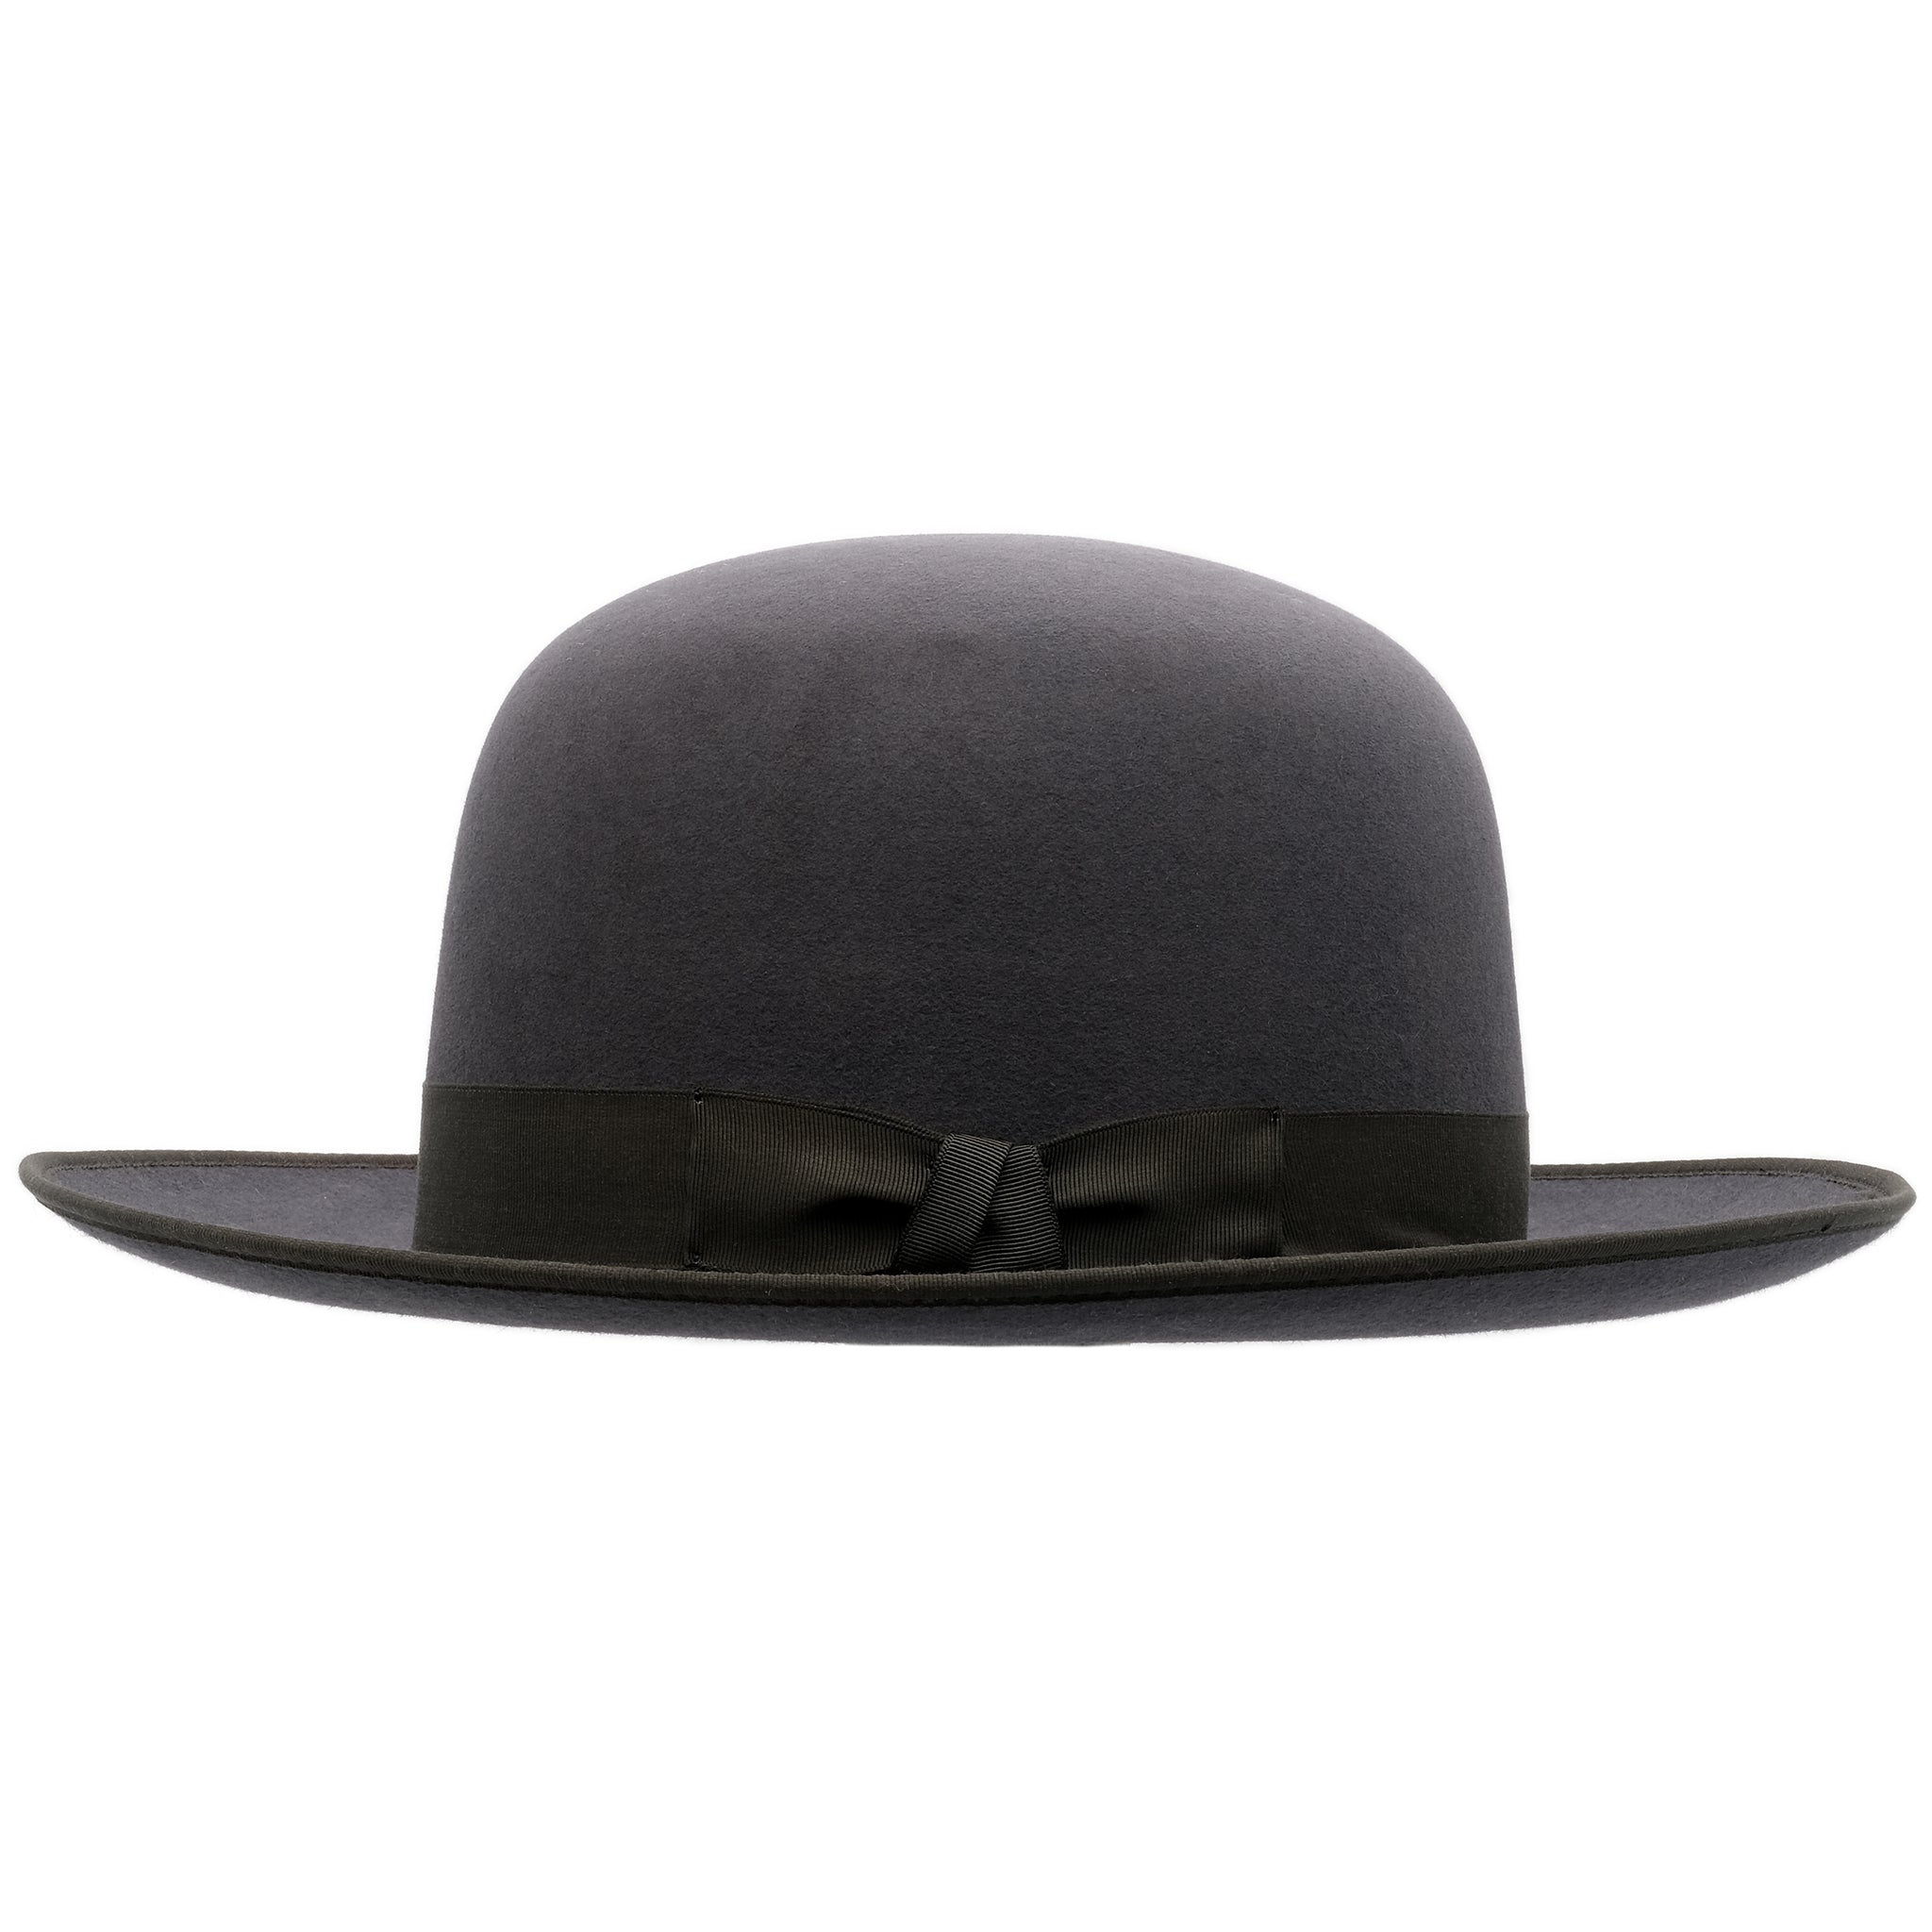 Side view of Akubra Squatter hat in Carbon grey colour, shown with open crown